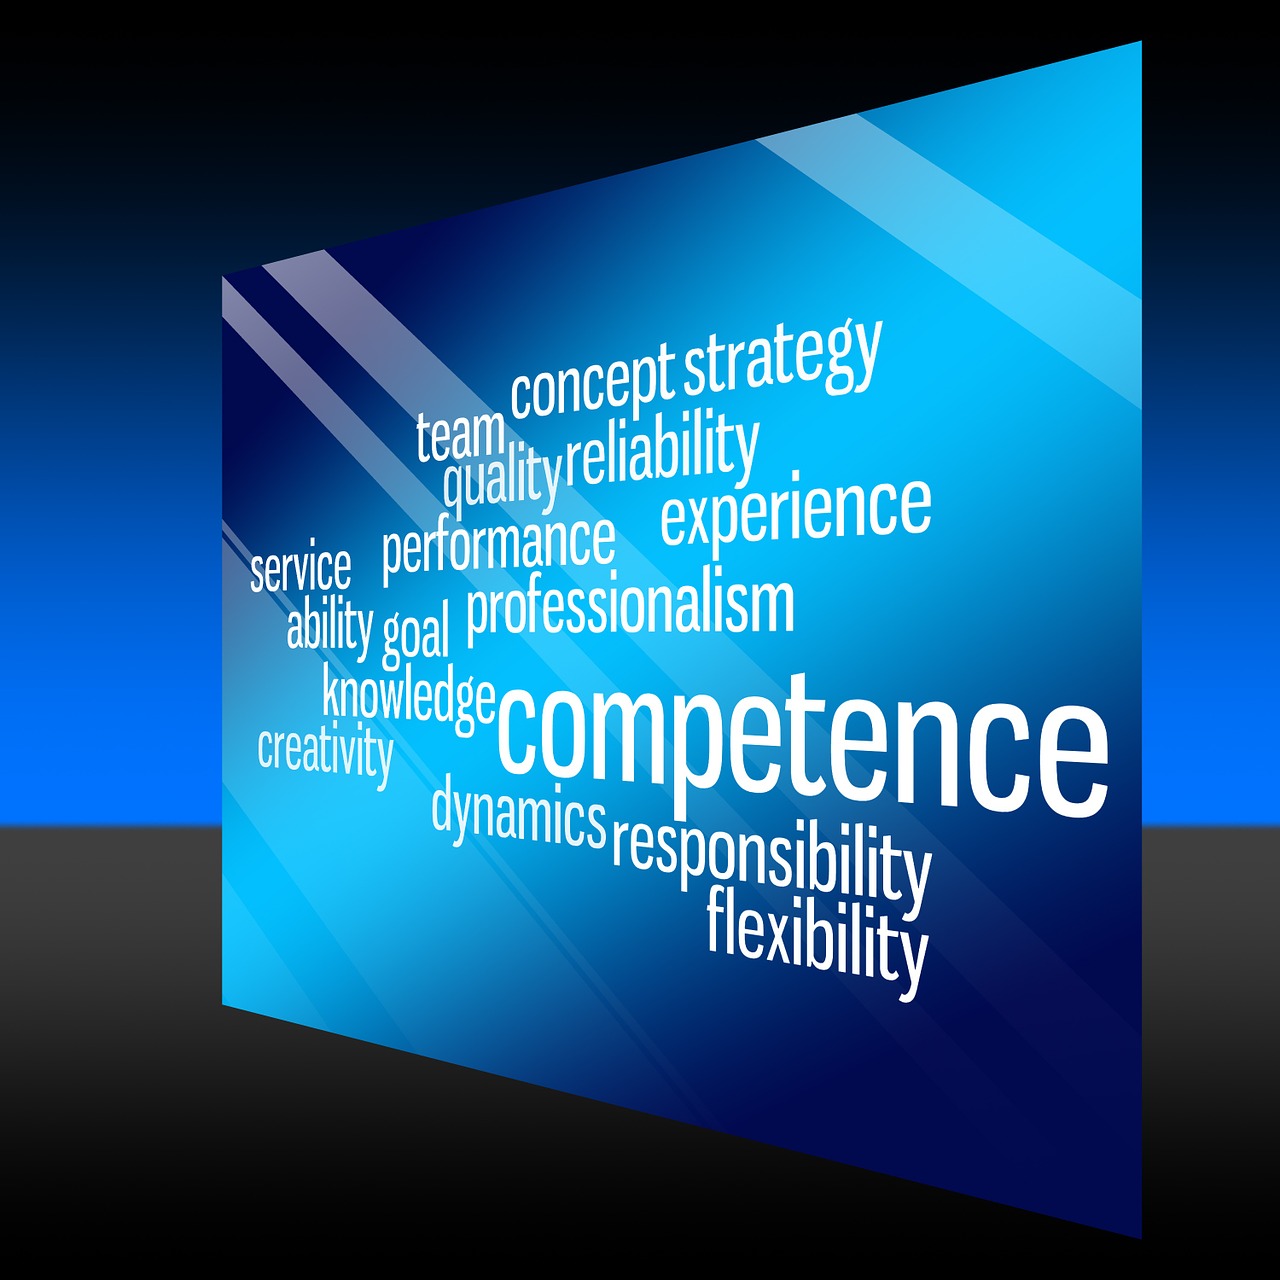 competence experience flexibility free photo